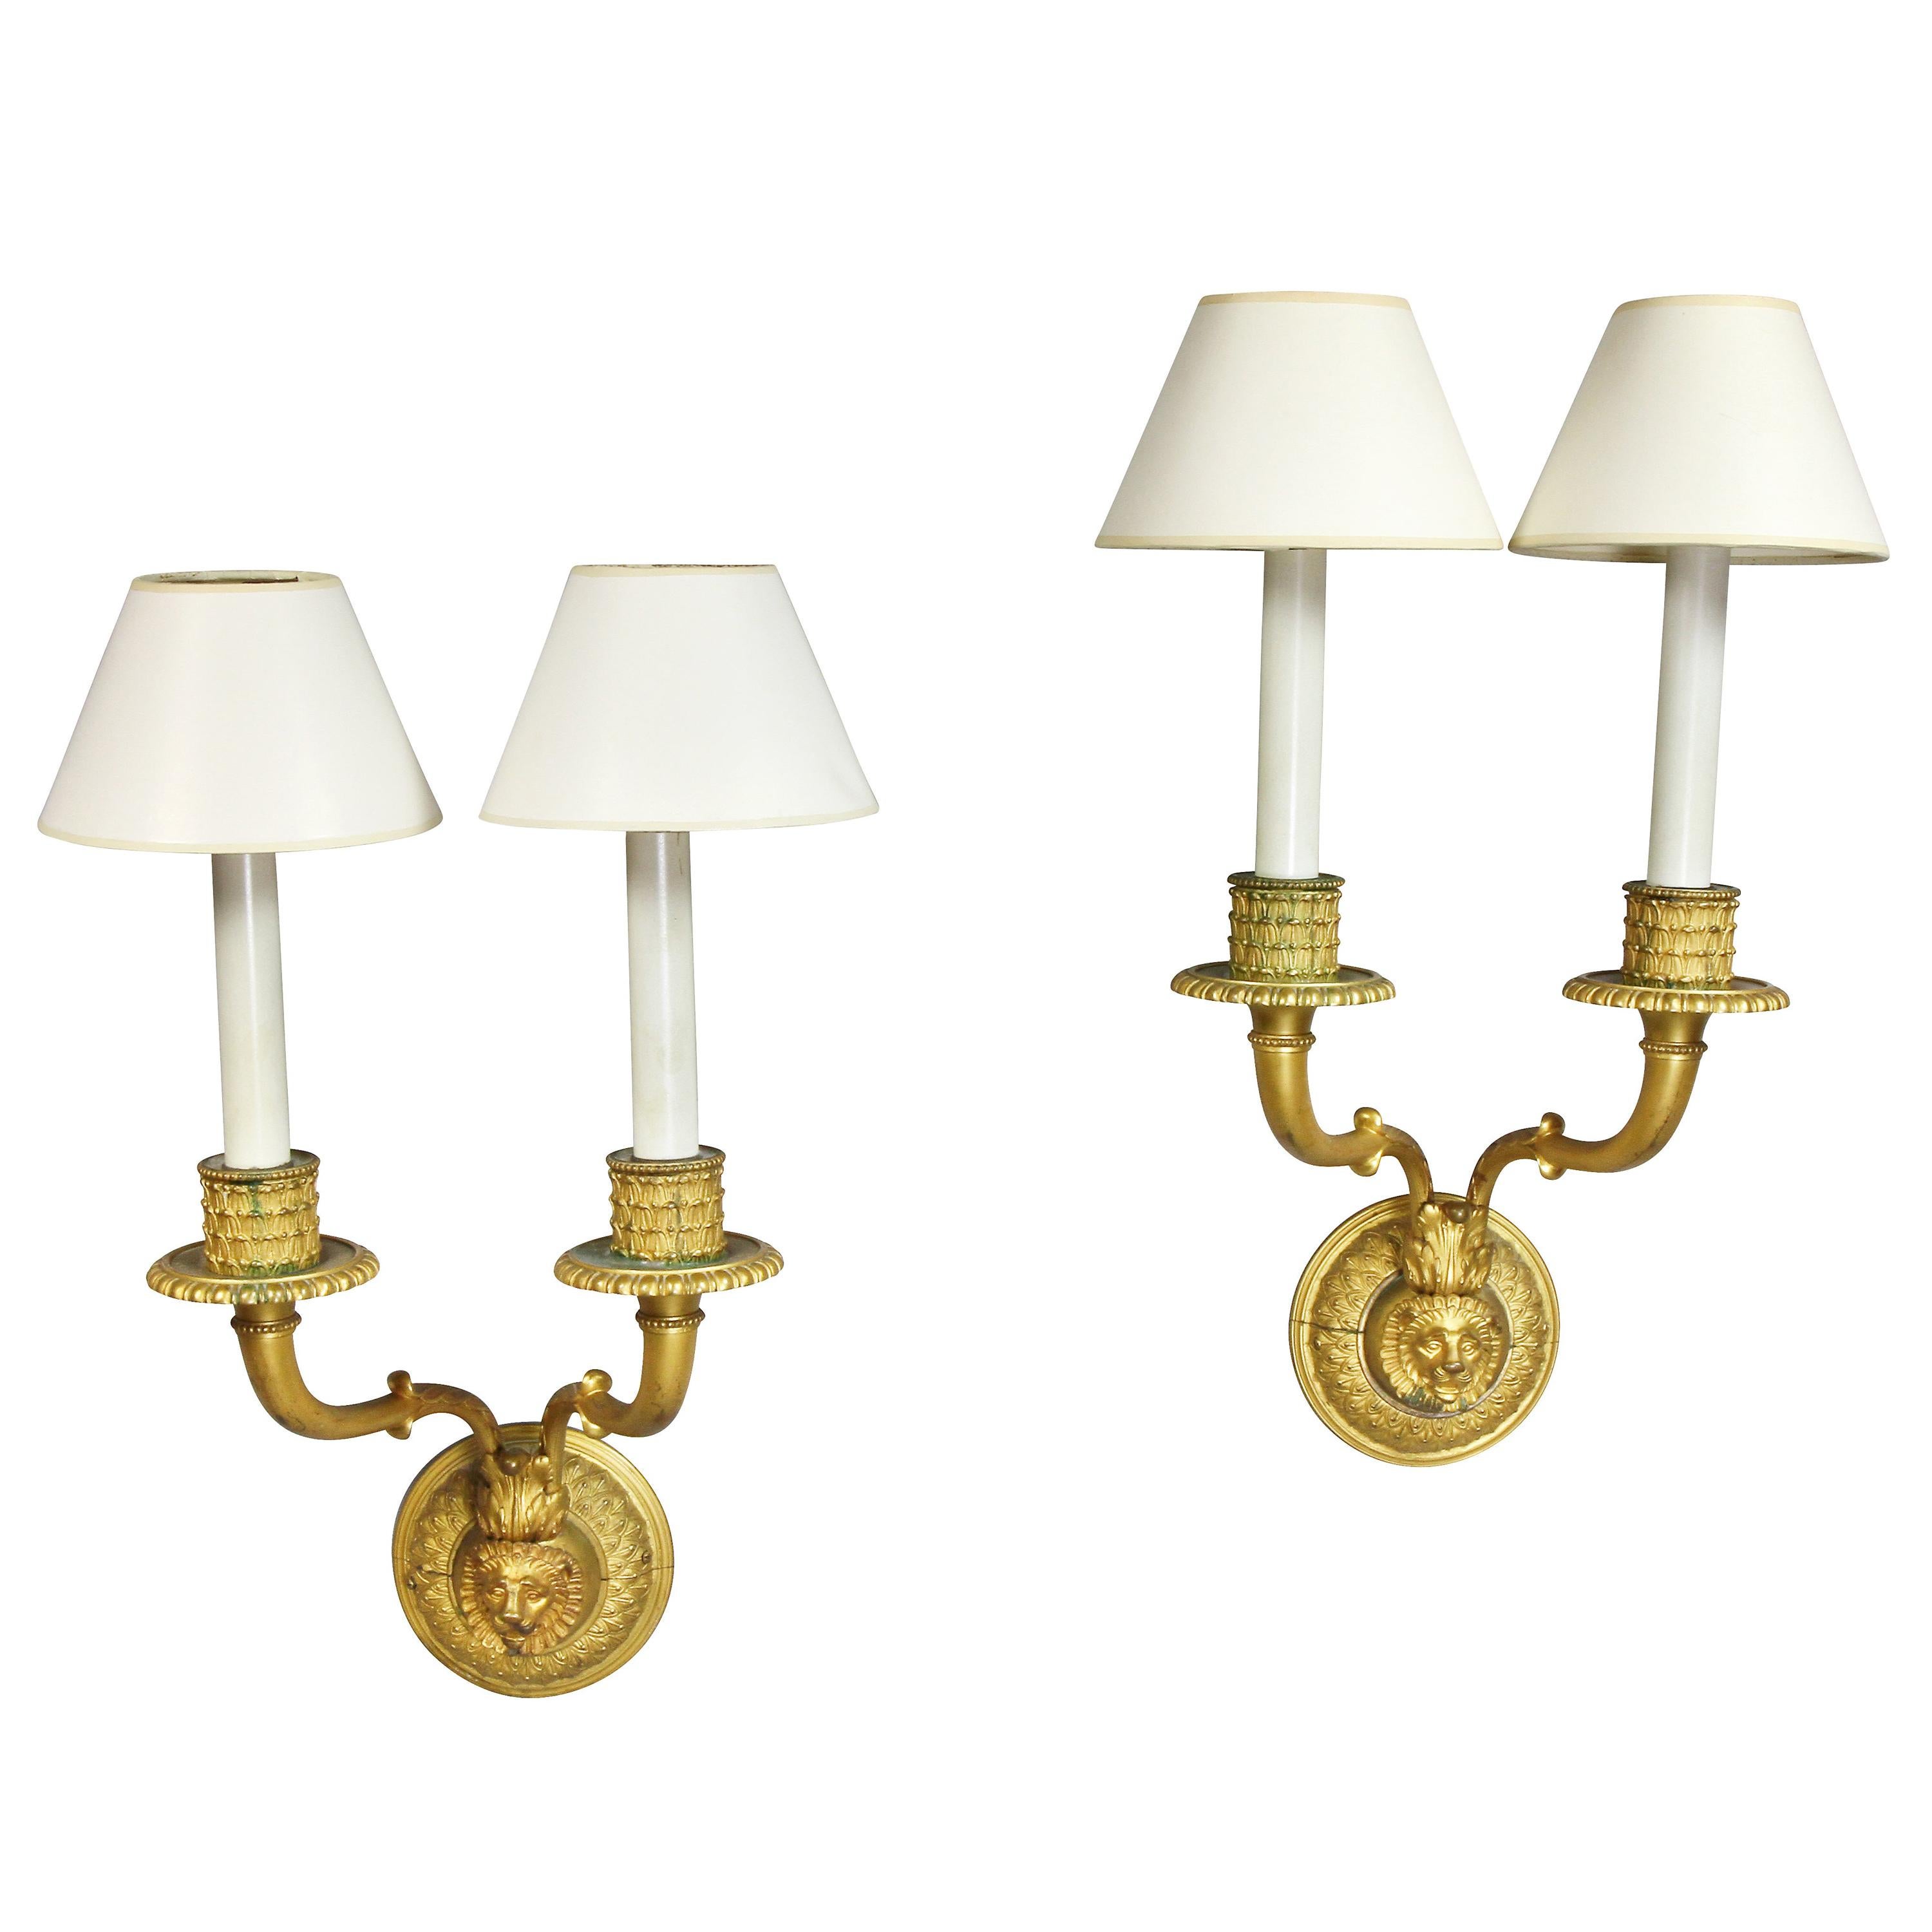 Pair of Neoclassic Style Gilt Bronze Wall Lights